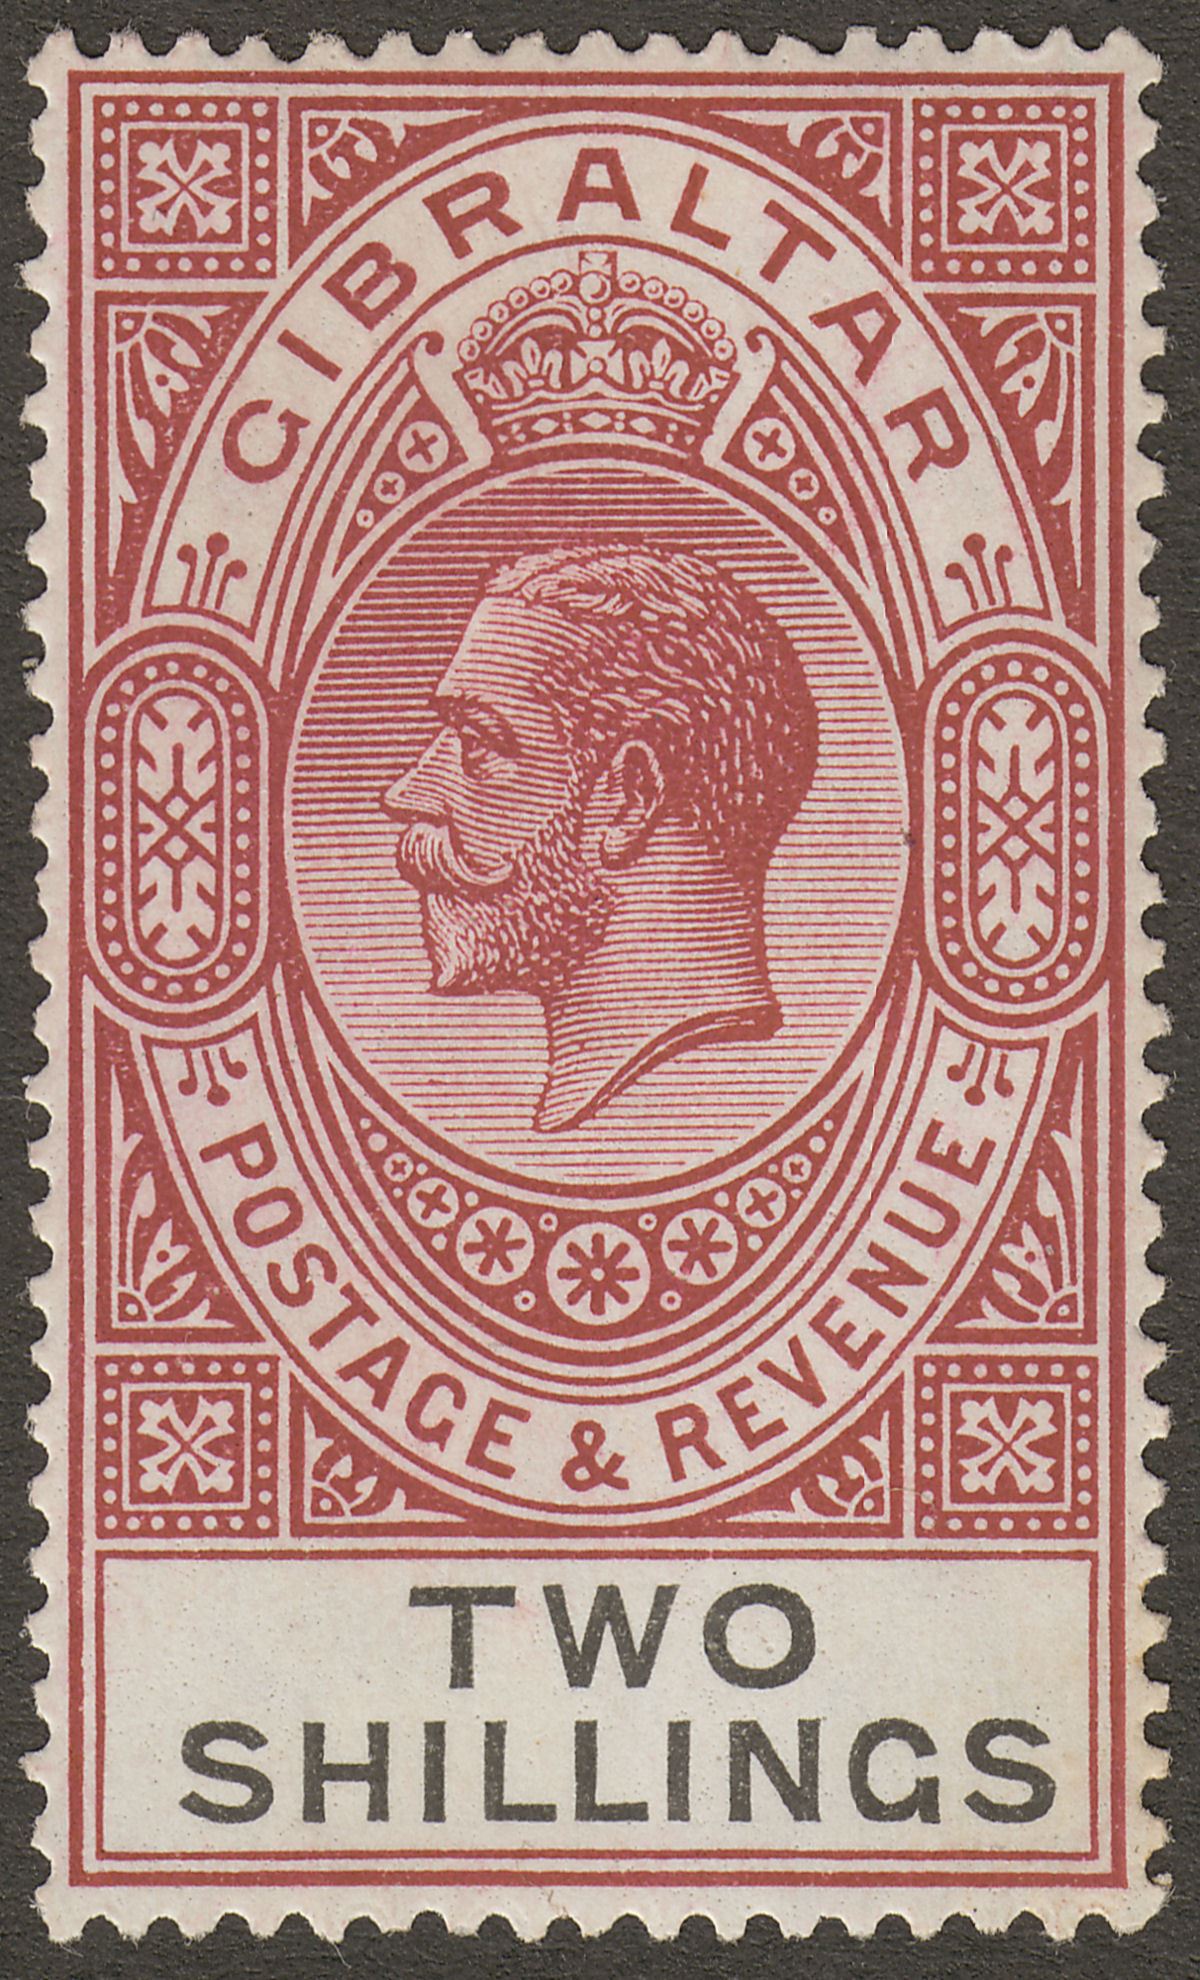 Gibraltar 1929 KGV 2sh Red-Brown and Black Mint SG103 cat £10 small tone